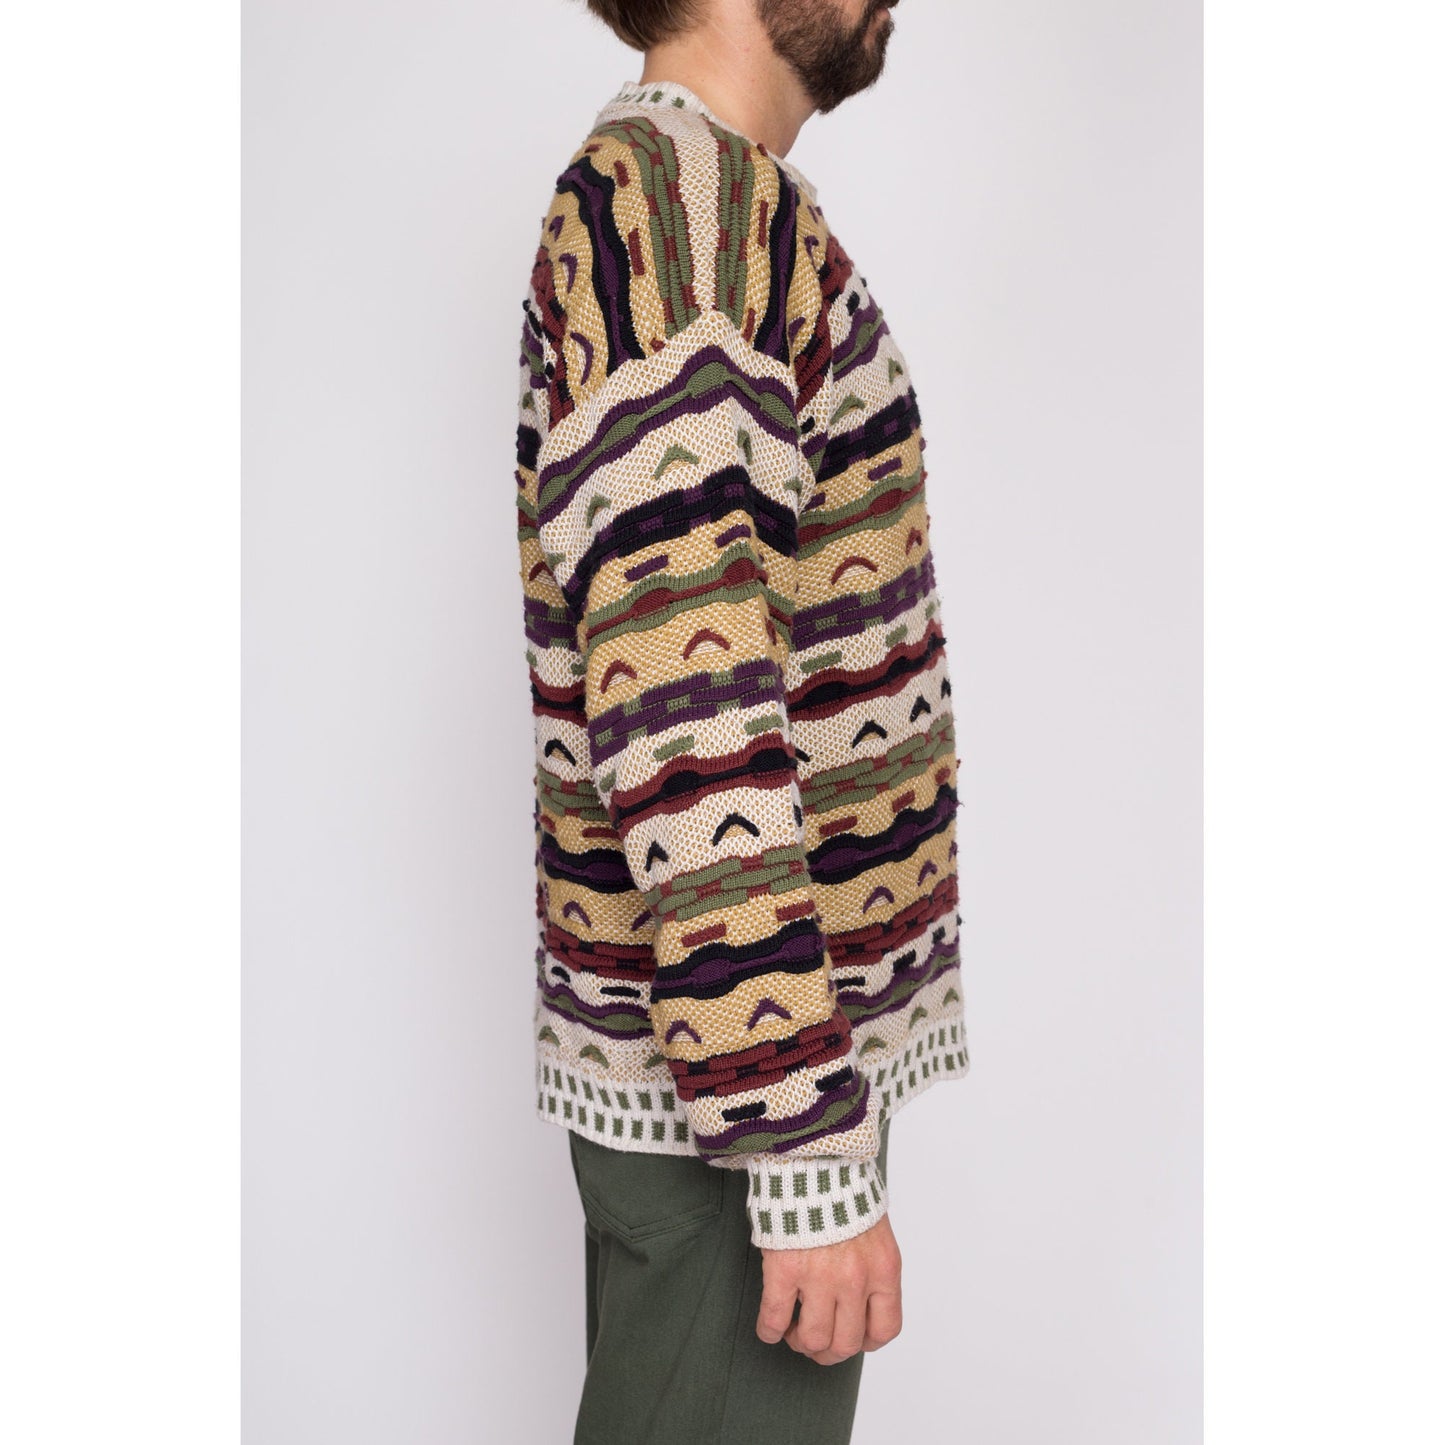 Large 90s Coogi Style 3D Knit Sweater | Vintage Textured Striped Knit Streetwear Pullover